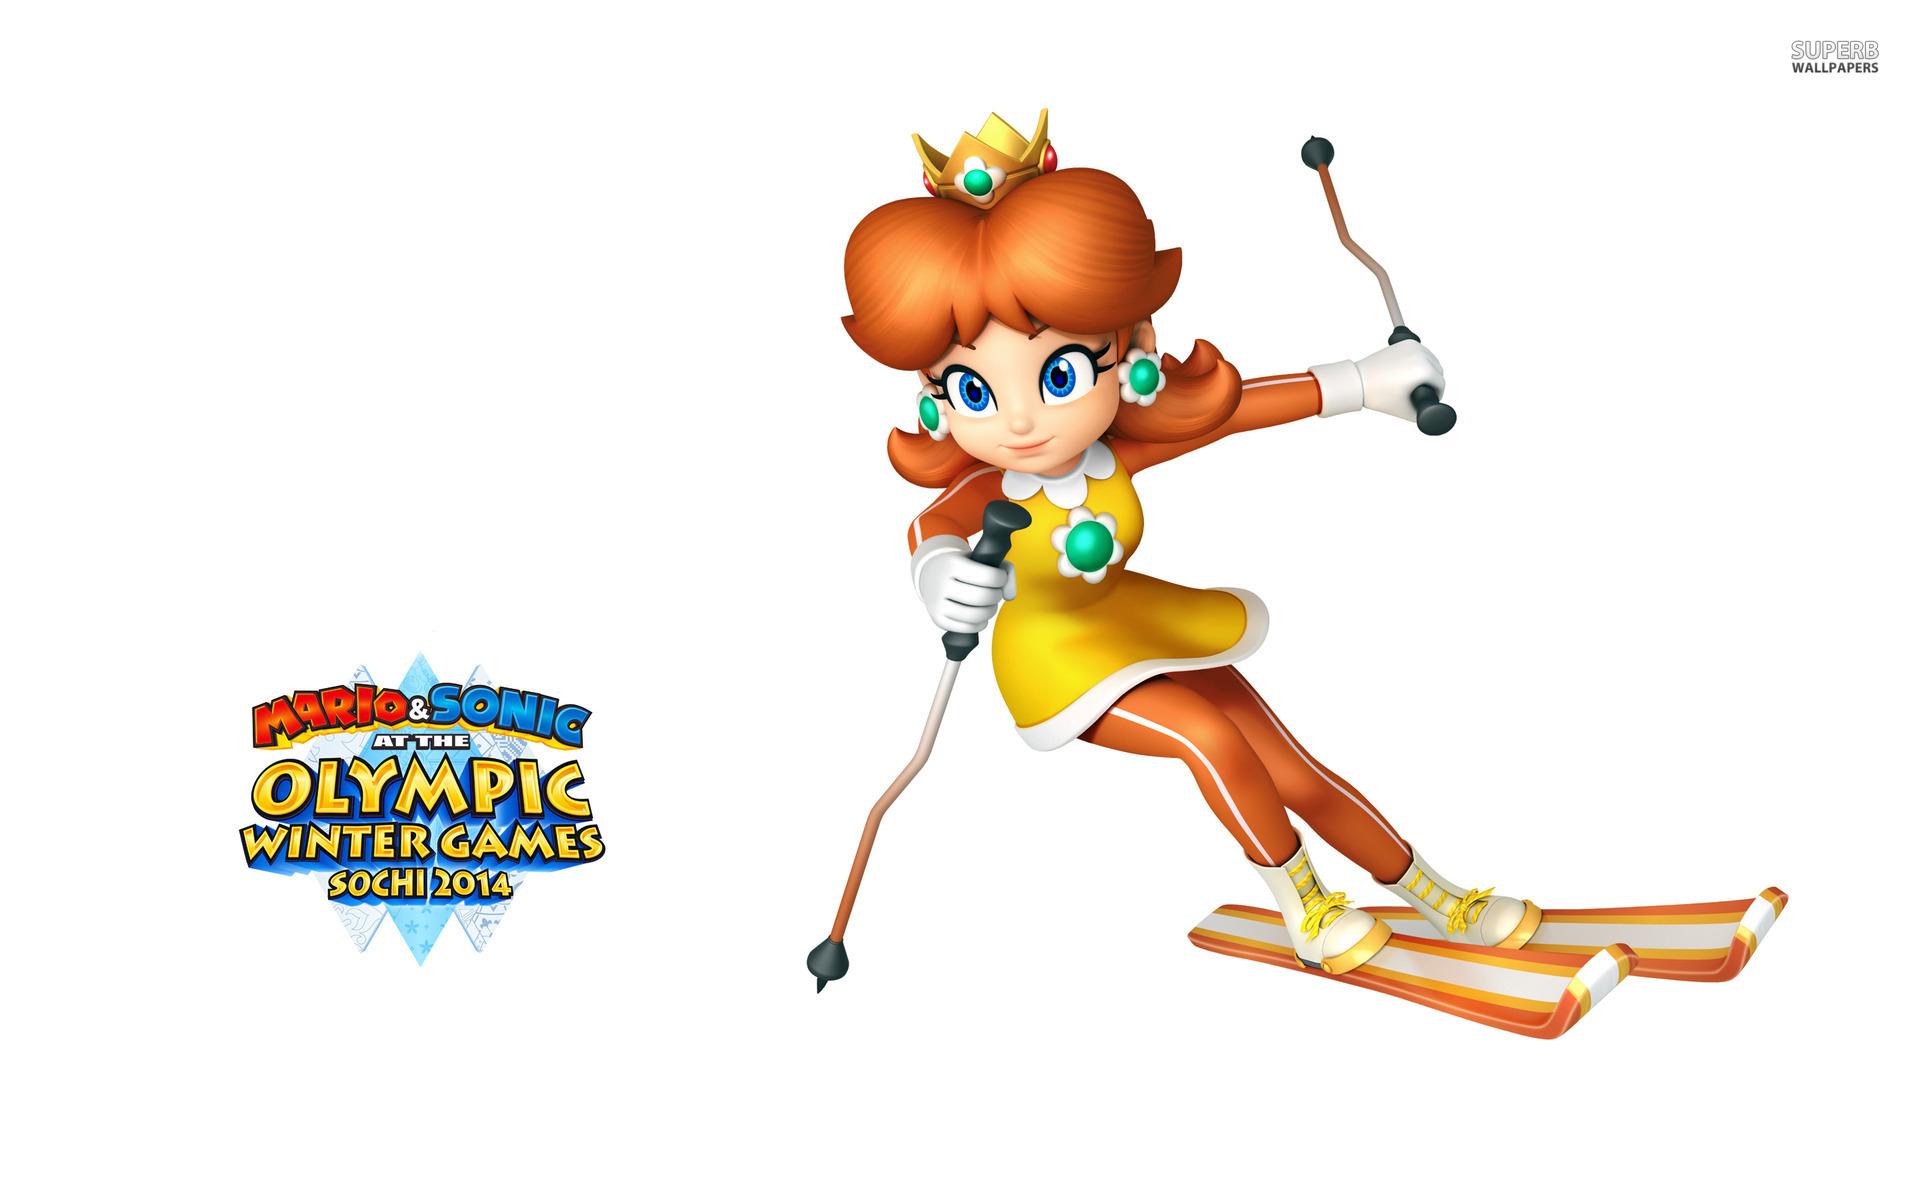 video game, mario & sonic at the olympic games, princess daisy, mario